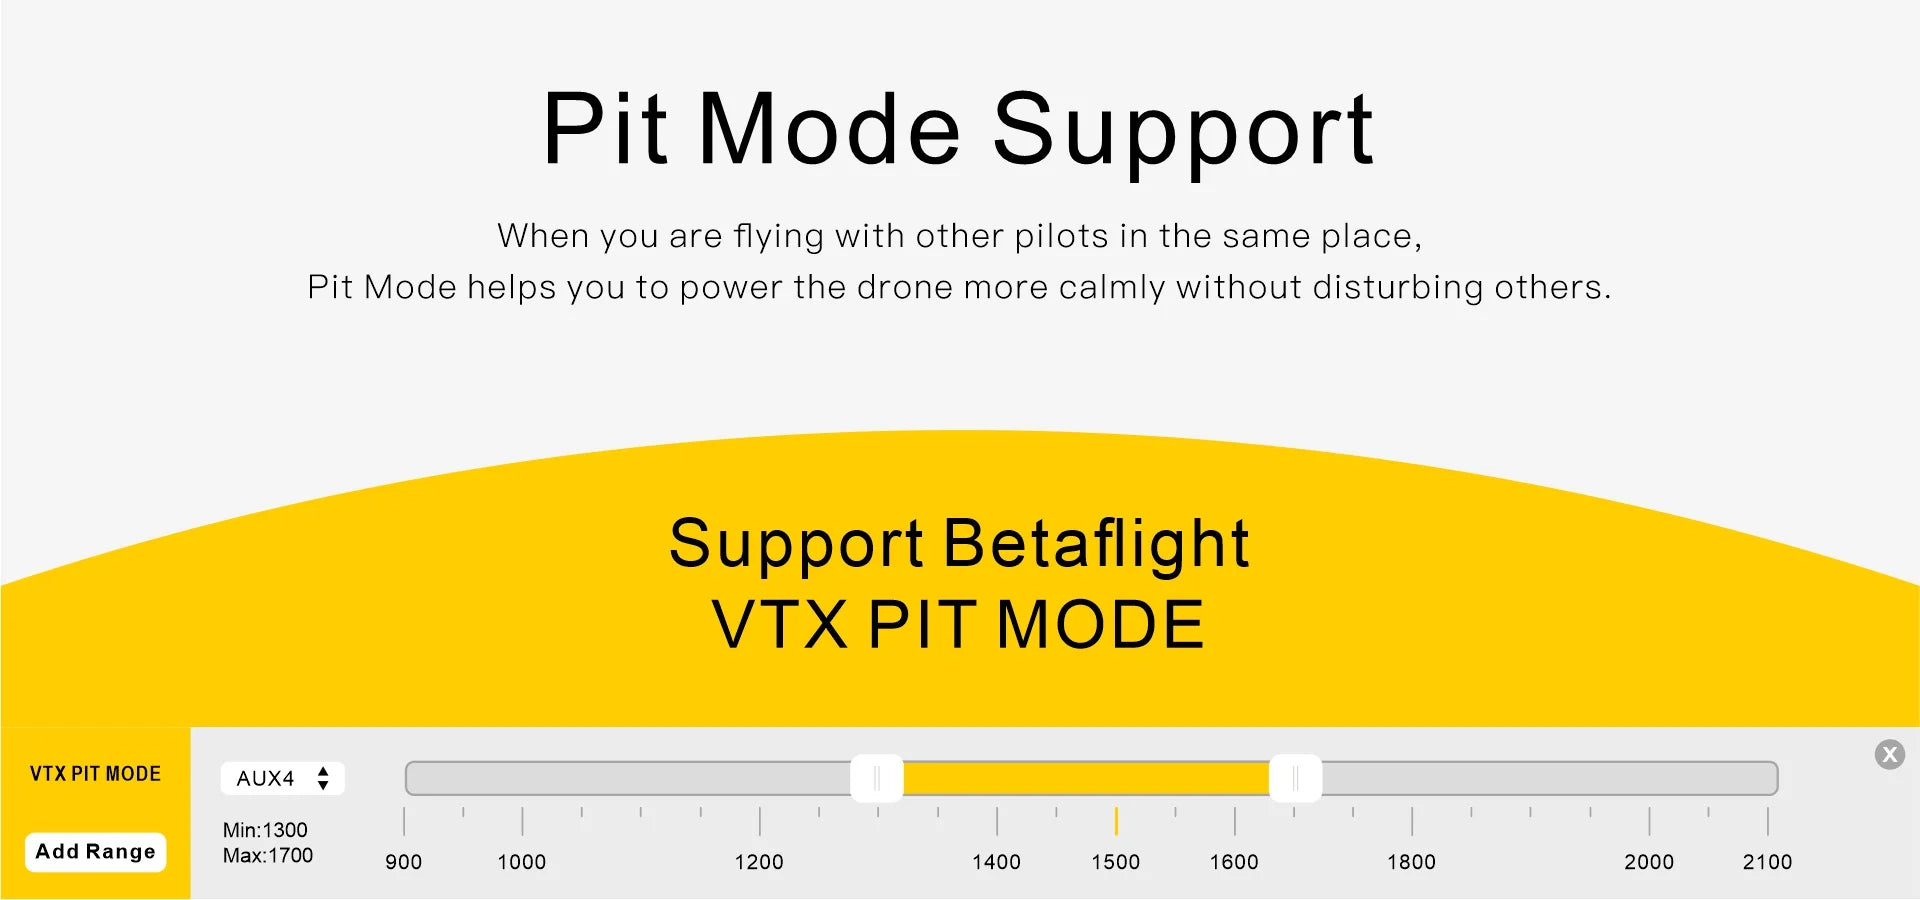 SpeedyBee TX800 5.8G VTX, Pit Mode Support When you are flying with other pilots in the same place, Pit Mode helps